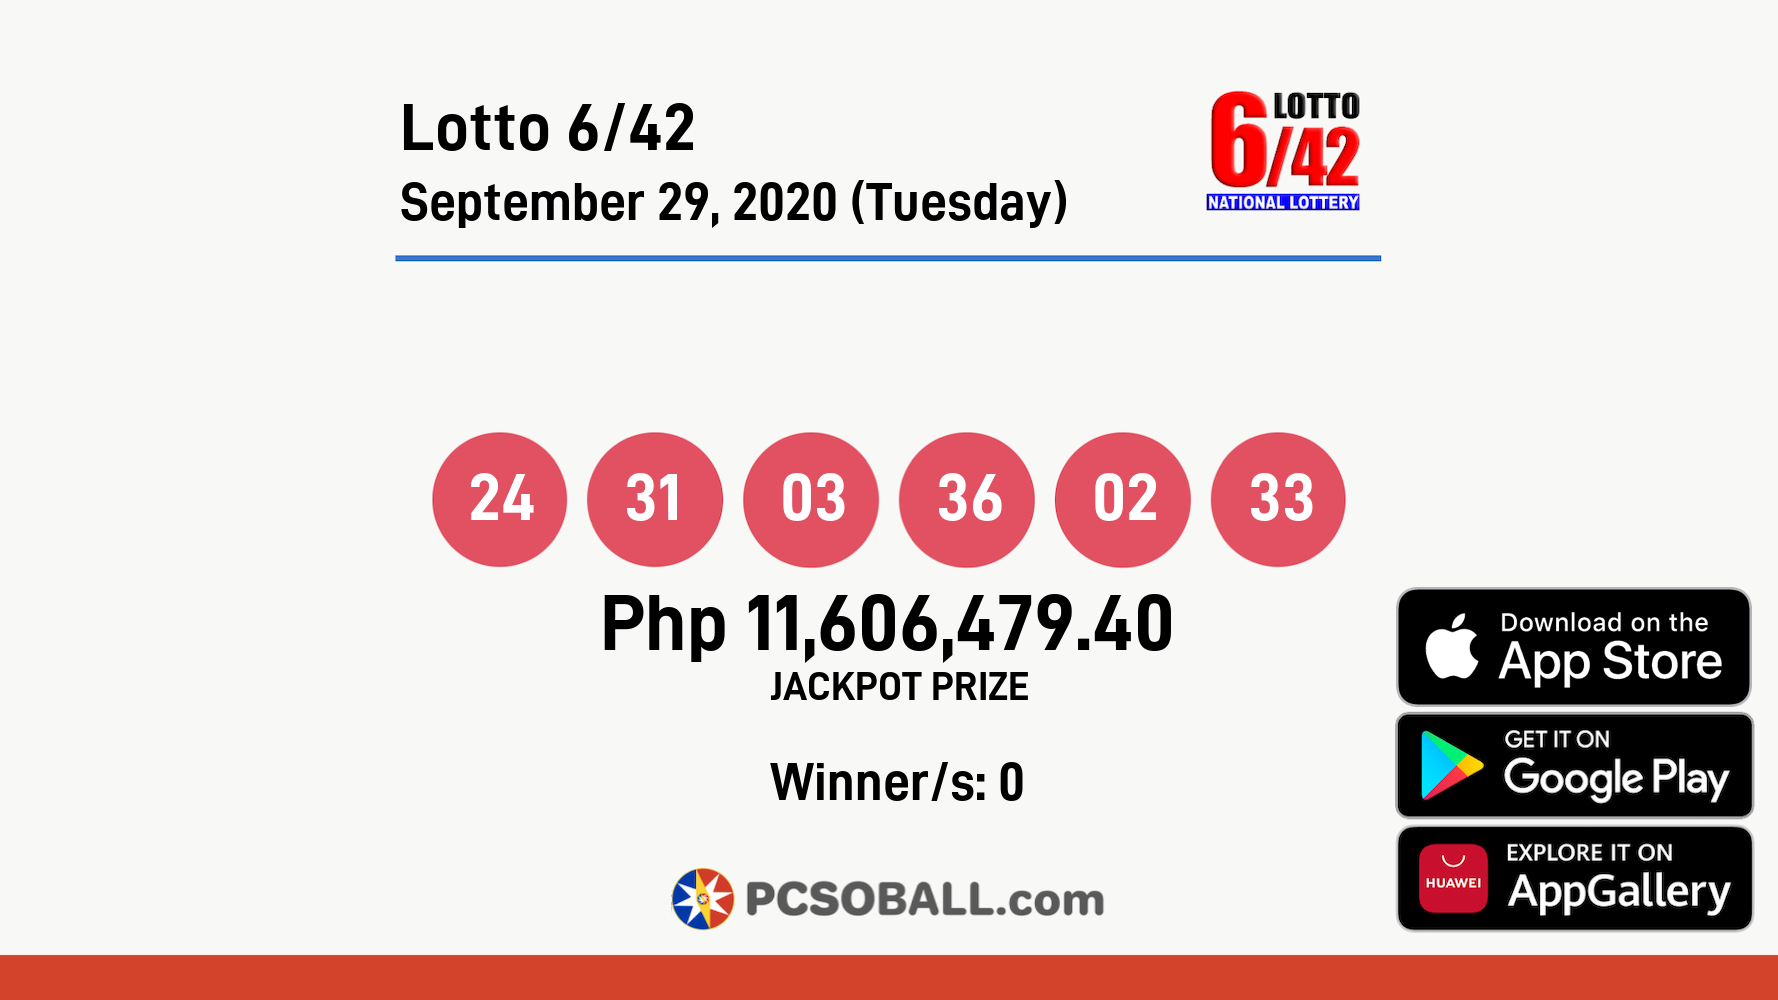 Lotto 6/42 September 29, 2020 (Tuesday) Result